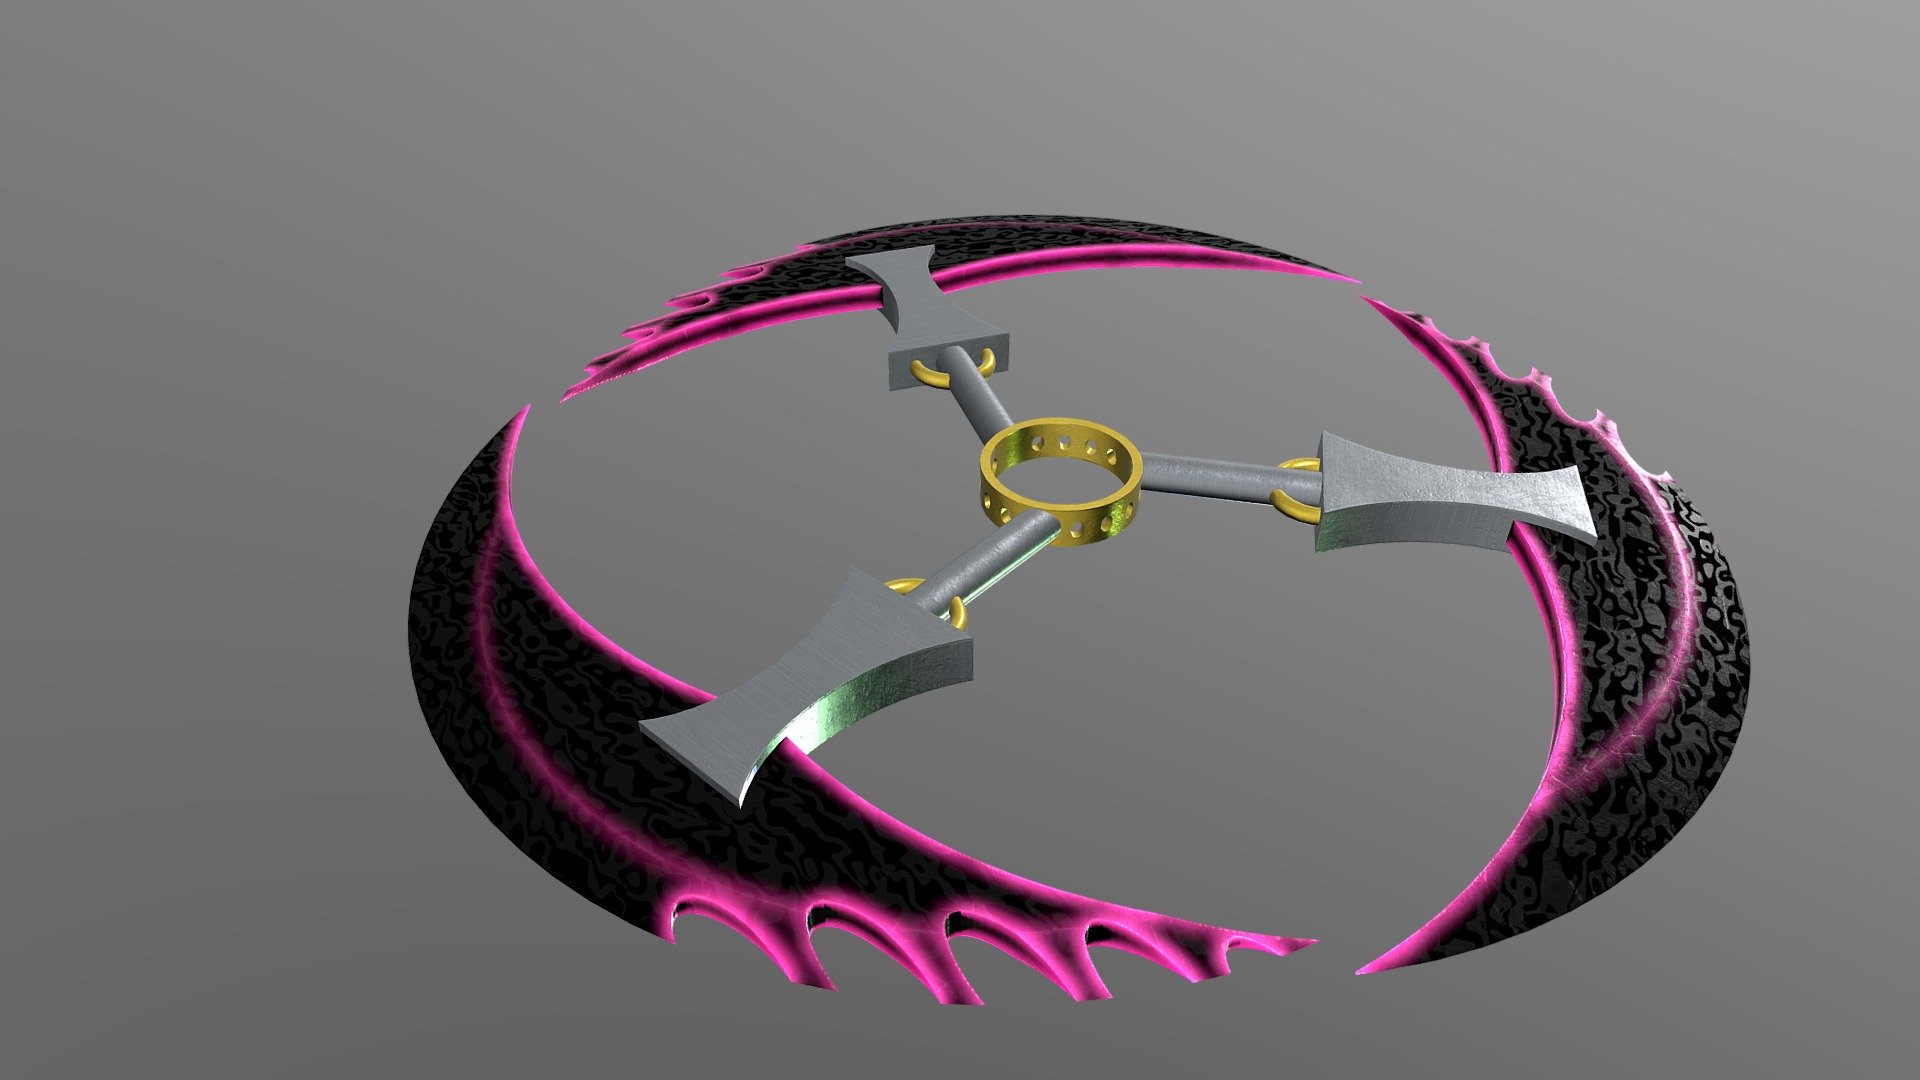 8.3k Verts/16.6k Tris  All textures are 2048 x 2048 res (PNG format) Models are unwrapped and UV textured. Addition files include base model as seperate objects. As well as UE4 and Blender PBR output templates.

This impressive 3D model brings together three symmetrical blades in an exceptional configuration. Each blade, a crescent of high-quality steel, converges to a central ring via a robust steel fastener. Ensuring the structure's stability, these fasteners are tethered to the handles with ornate gold loops, contributing an element of elegance to the formidable weapon.

Half of each blade showcases a serrated edge, amplifying the weapon's deadly potential. To facilitate comfortable and secure wielding, the central ring is designed with four finger holes strategically placed between each pair of handles. The model exudes an air of menacing beauty, marking a fascinating intersection of design intricacy and lethal functionality 3d model